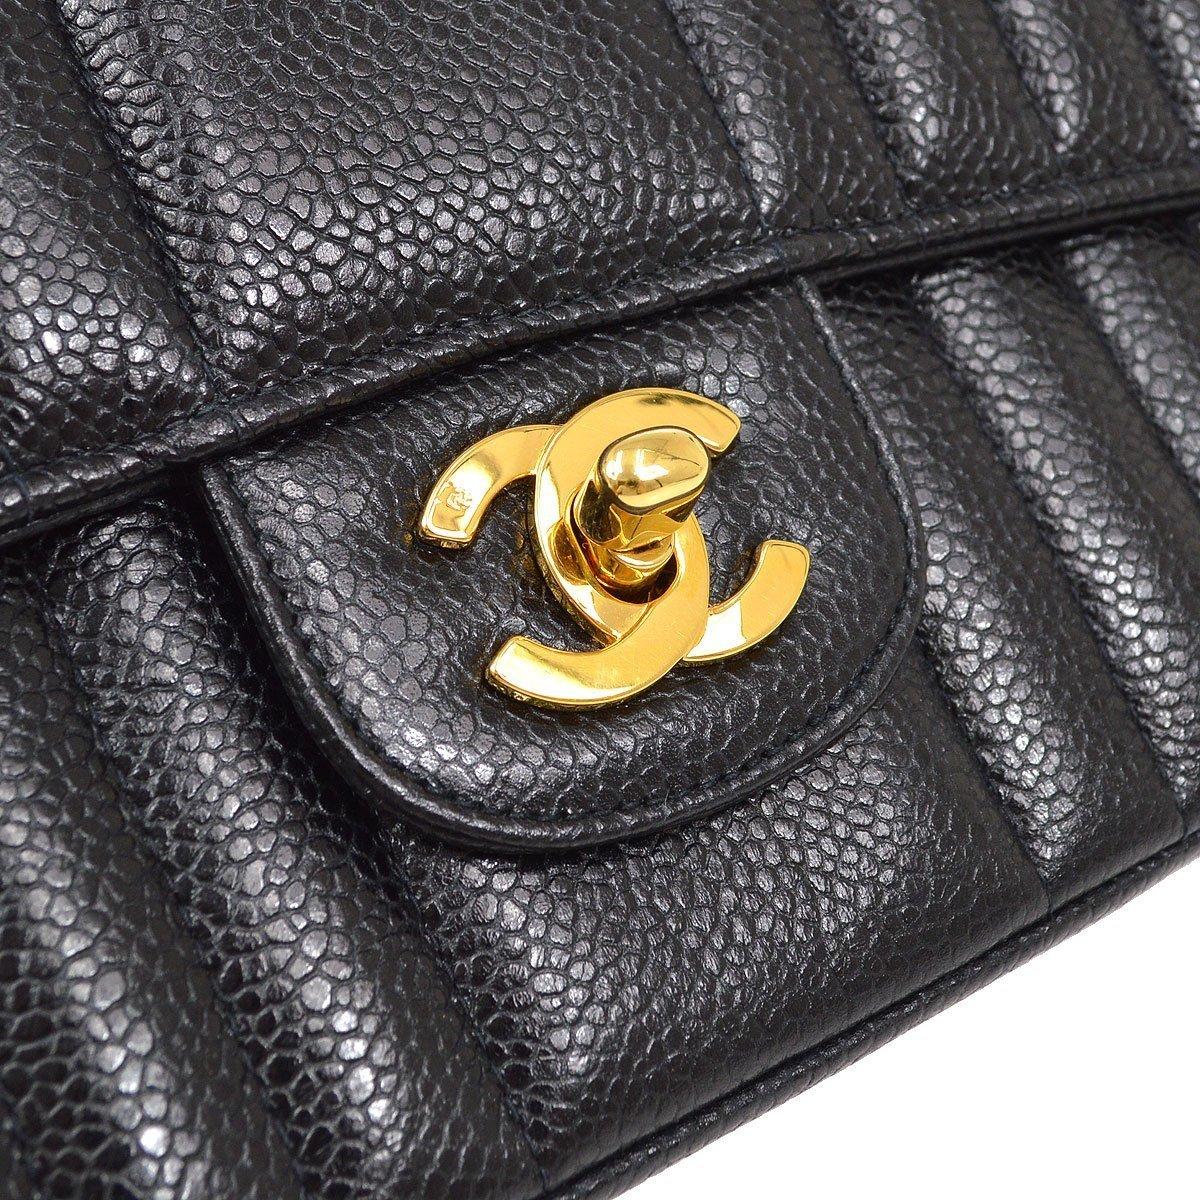 Pre-Owned Vintage Condition
From 1994 Collection
Caviar  Leather
Gold Tone Hardware
Leather Lining
Measures 9.75